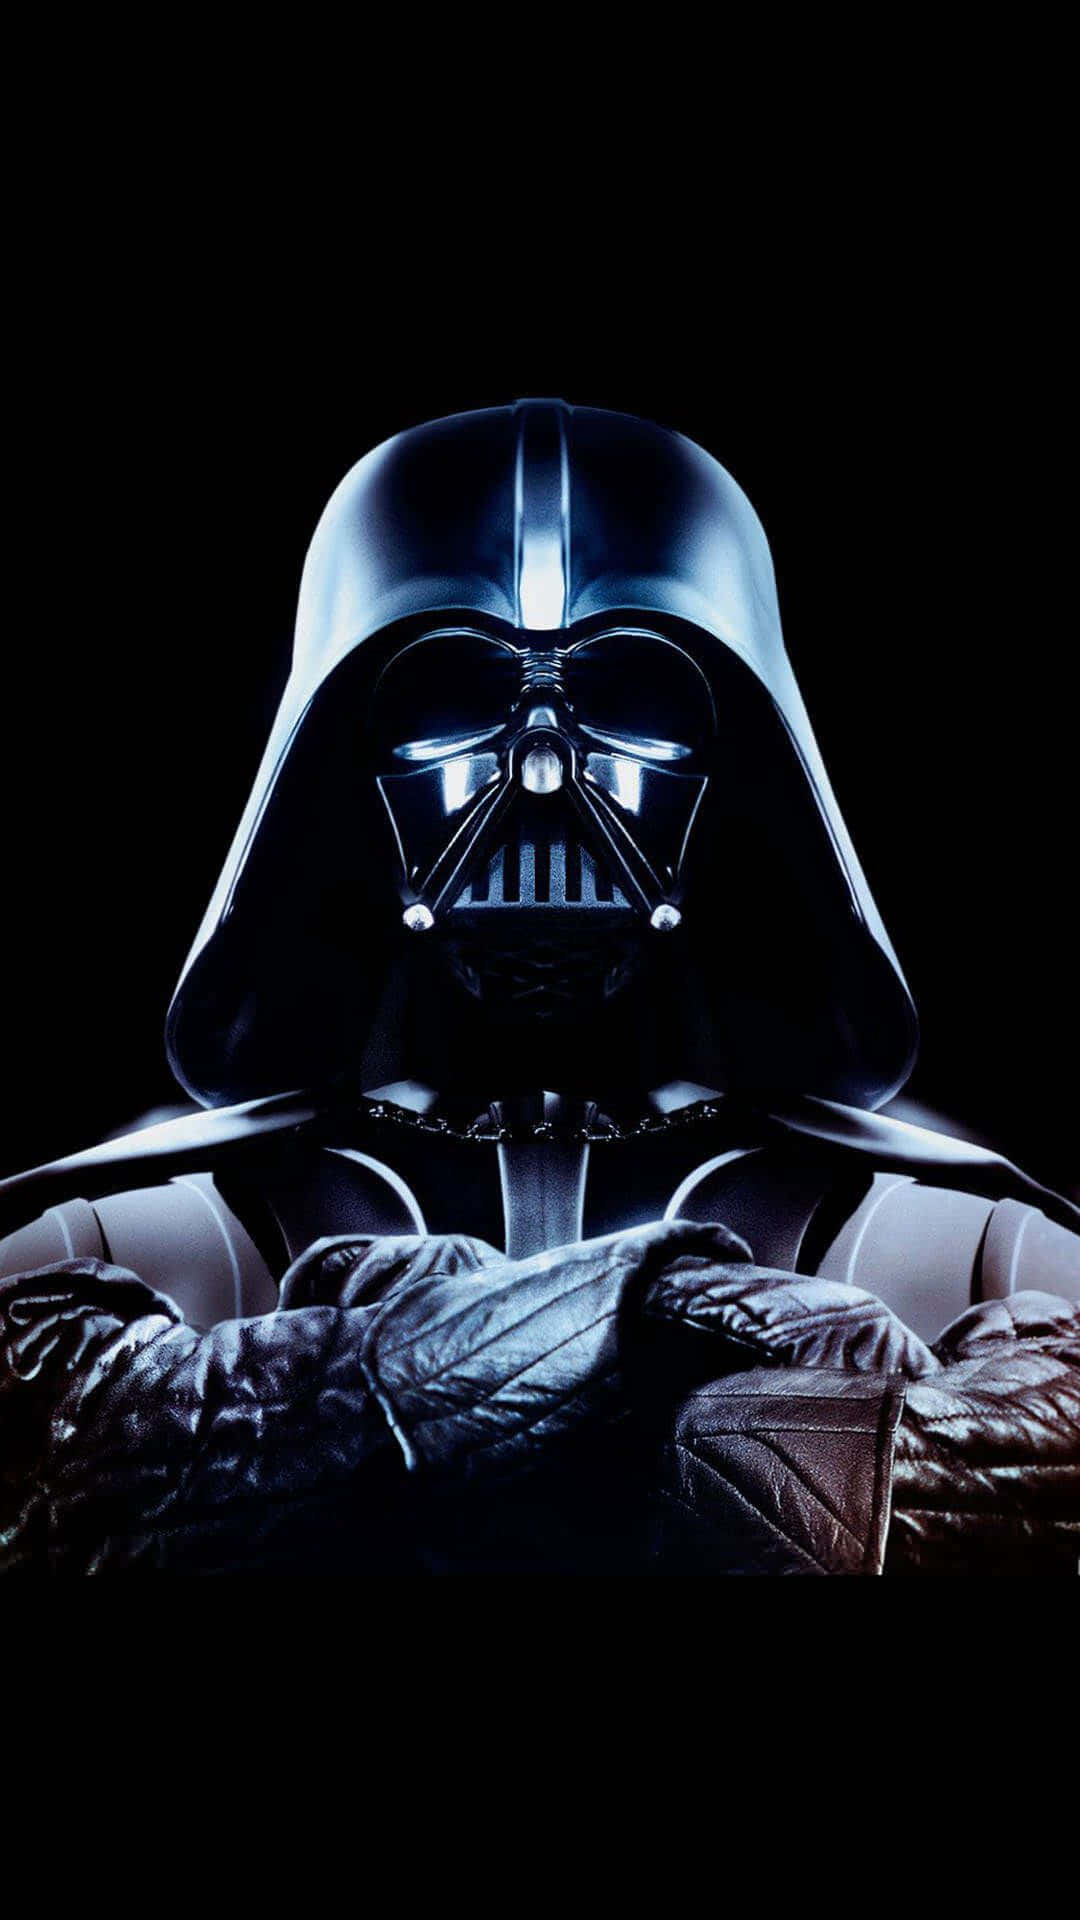 "Be strong. Embrace the dark side with the Darth Vader Iphone." Wallpaper